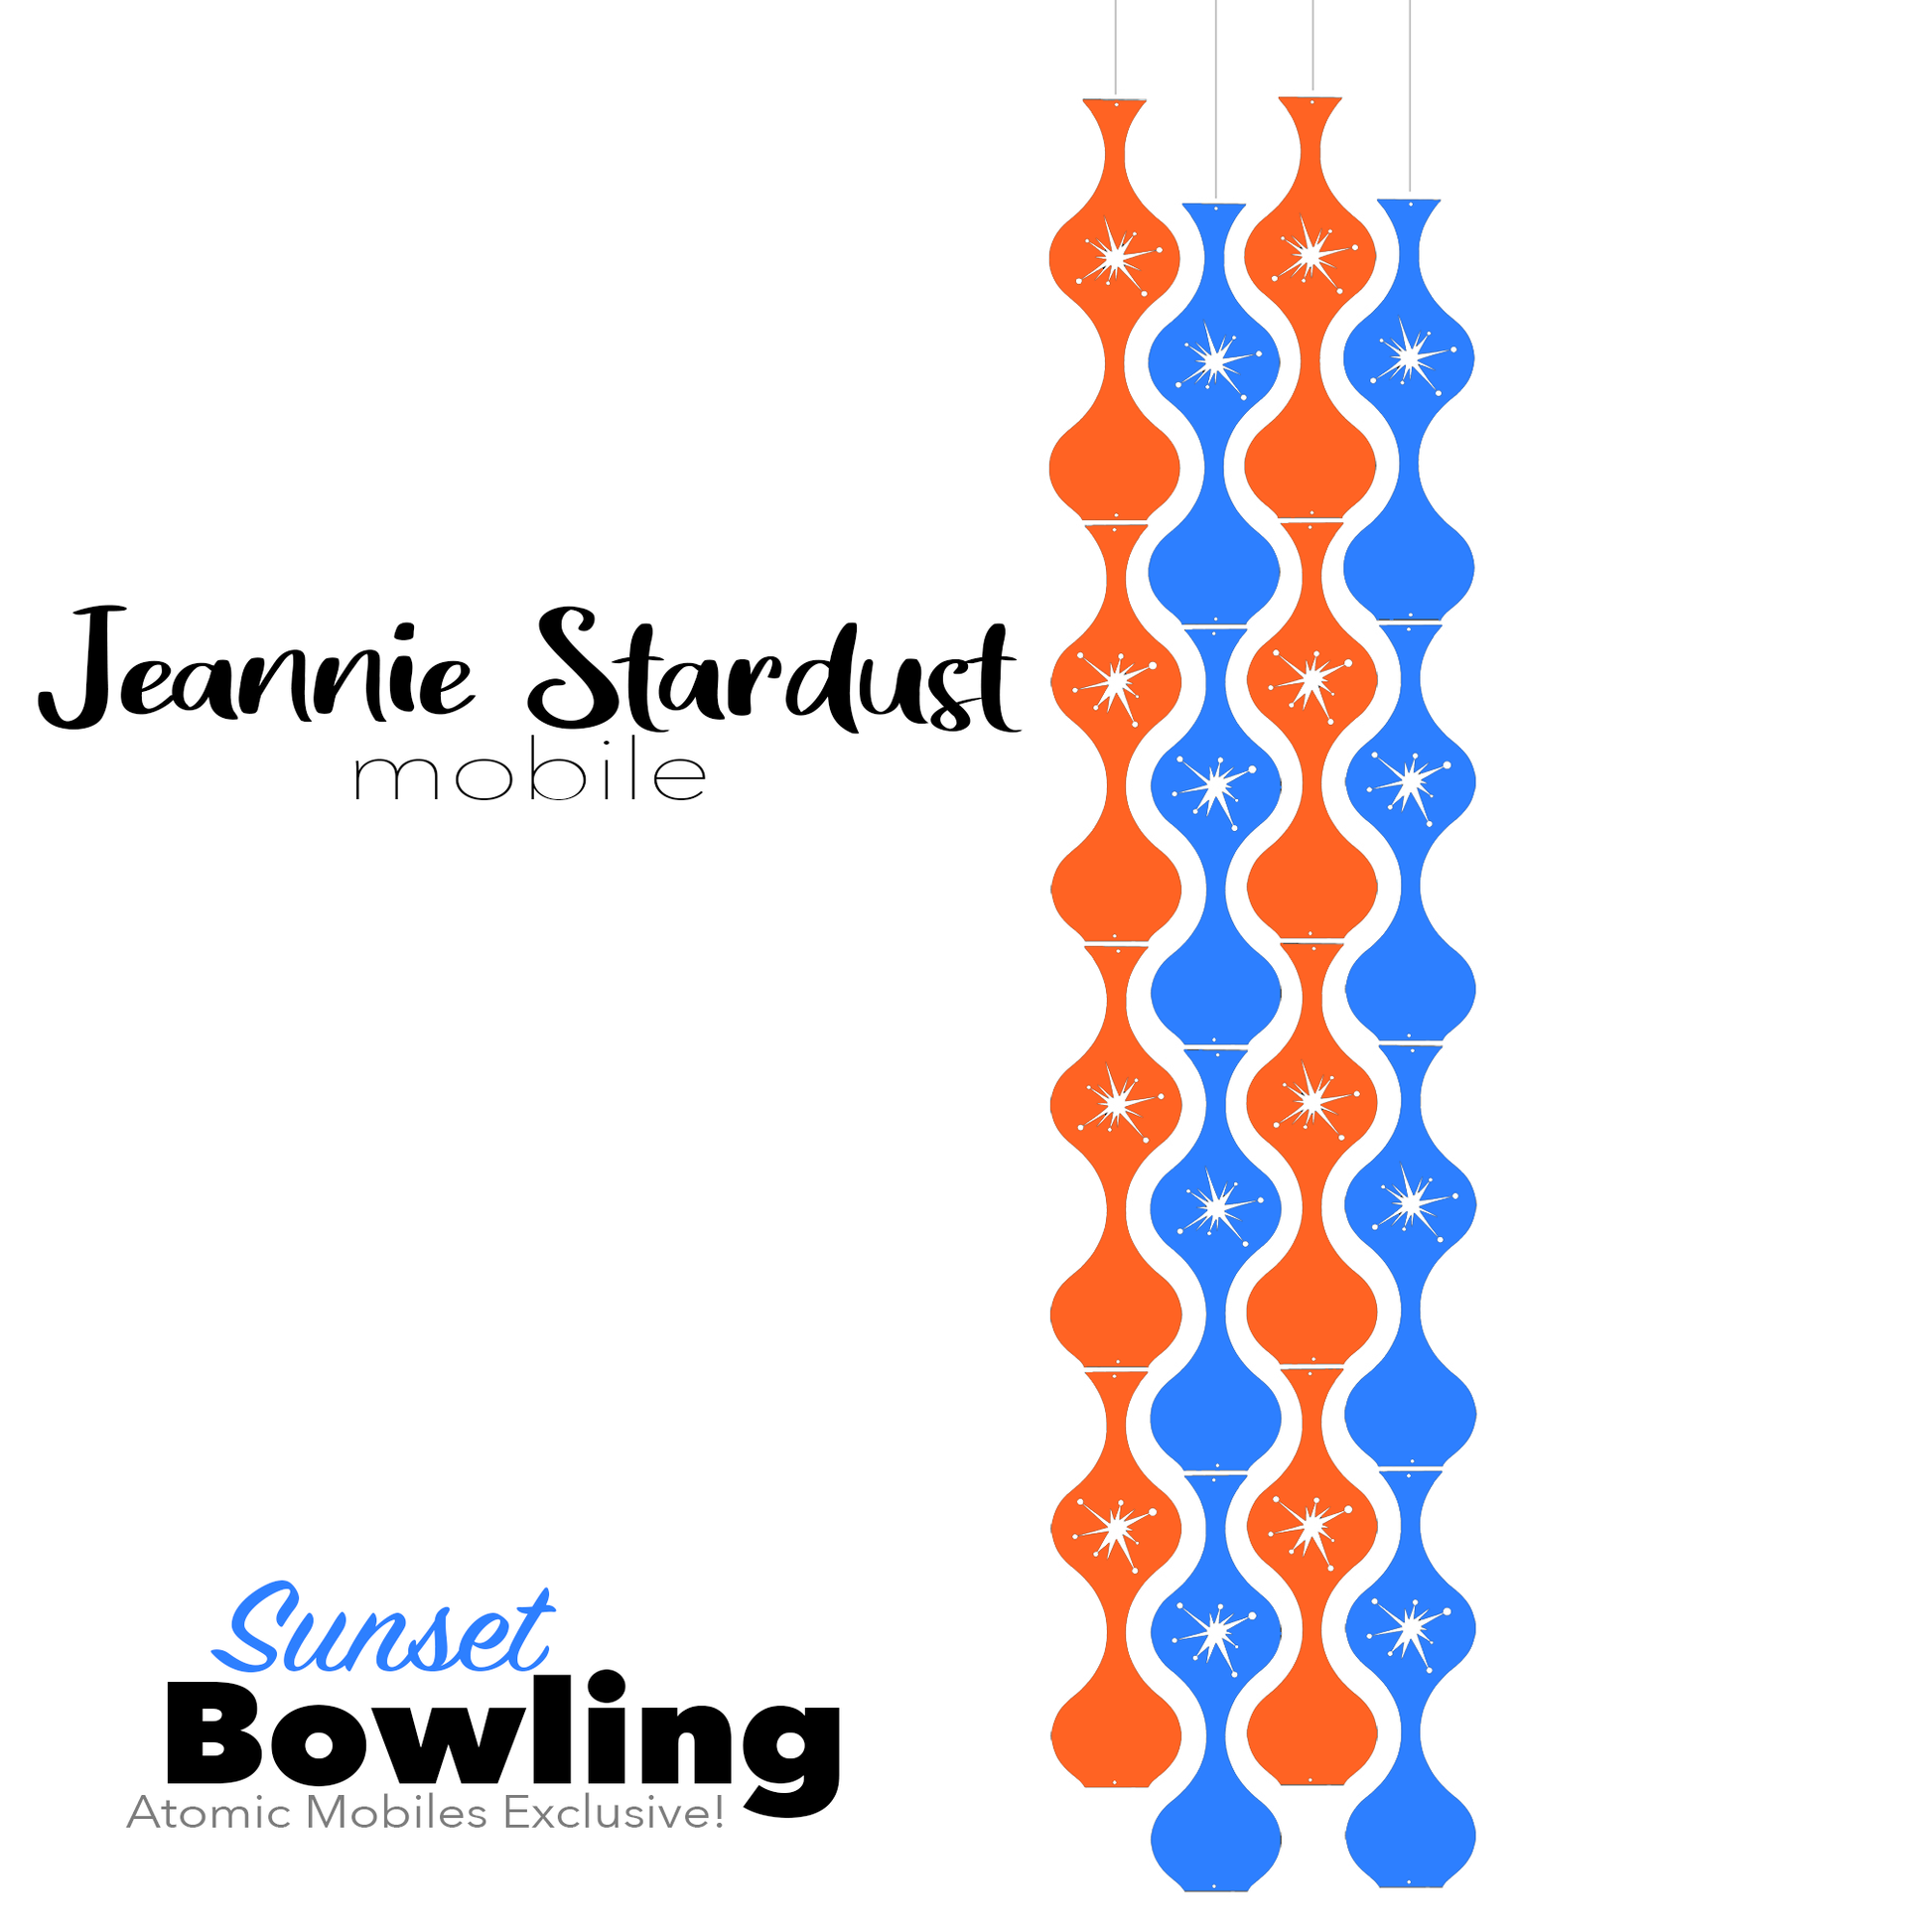 Sunset Bowling Jeannie Stardust Hanging Art Mobile - mid century modern home decor in Orange and Blue - by AtomicMobiles.com